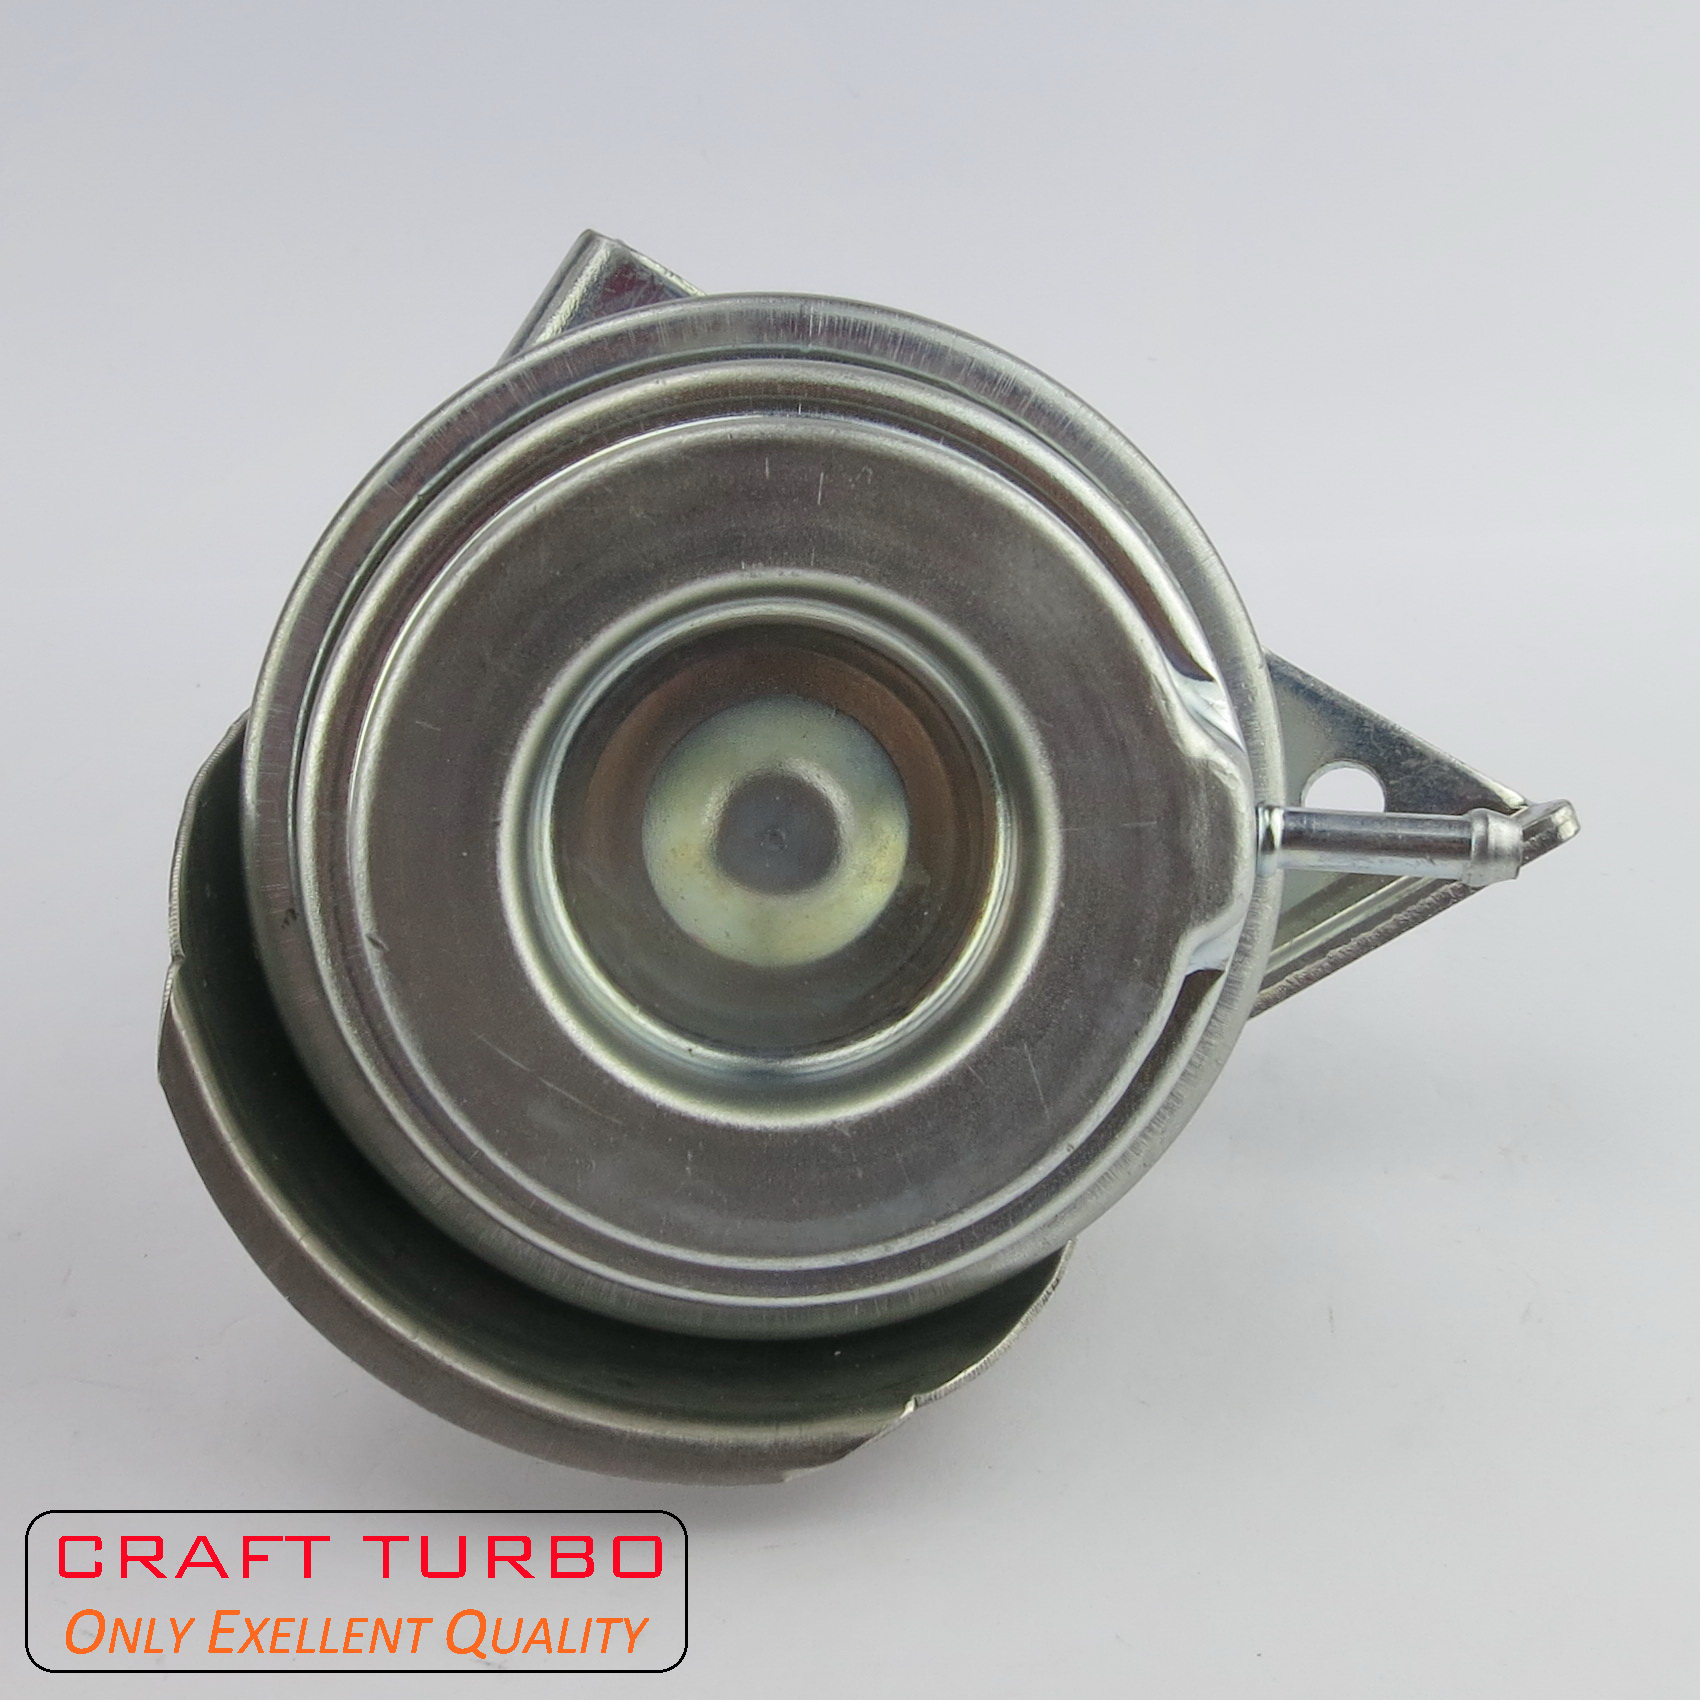 GT2260V Actuator for Turbochargers